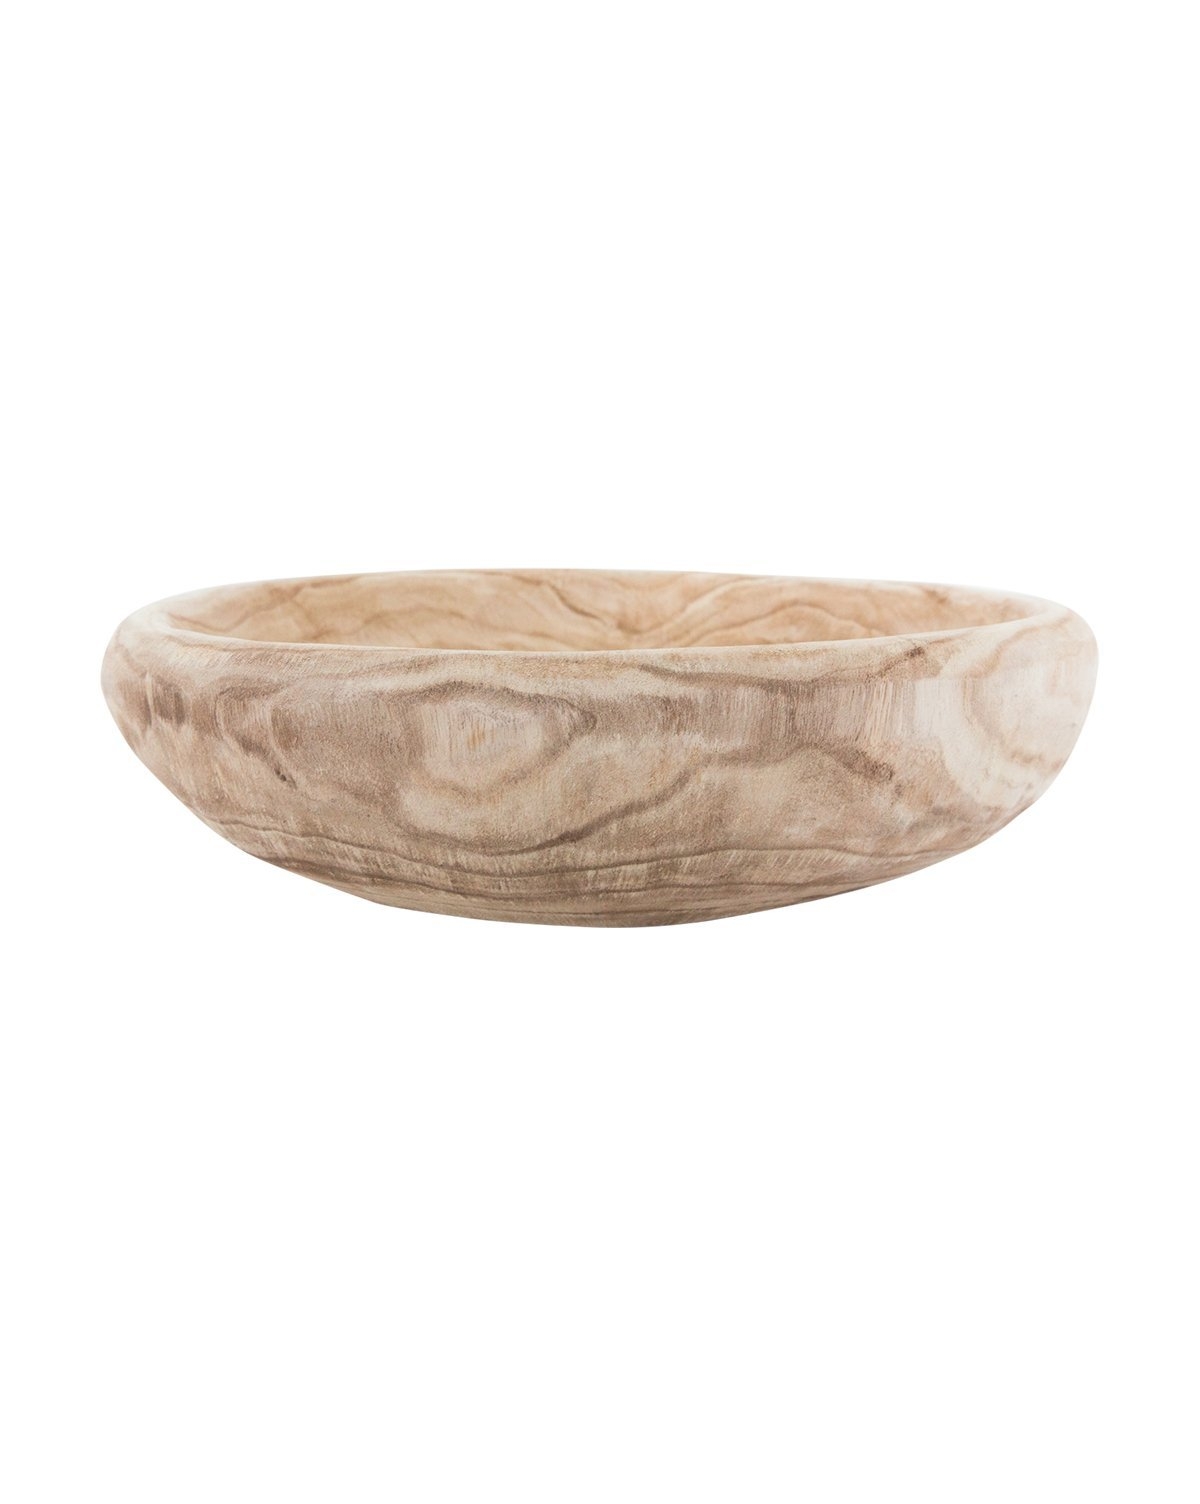 SIMPLY SMOOTH WOODEN BOWL - Image 0